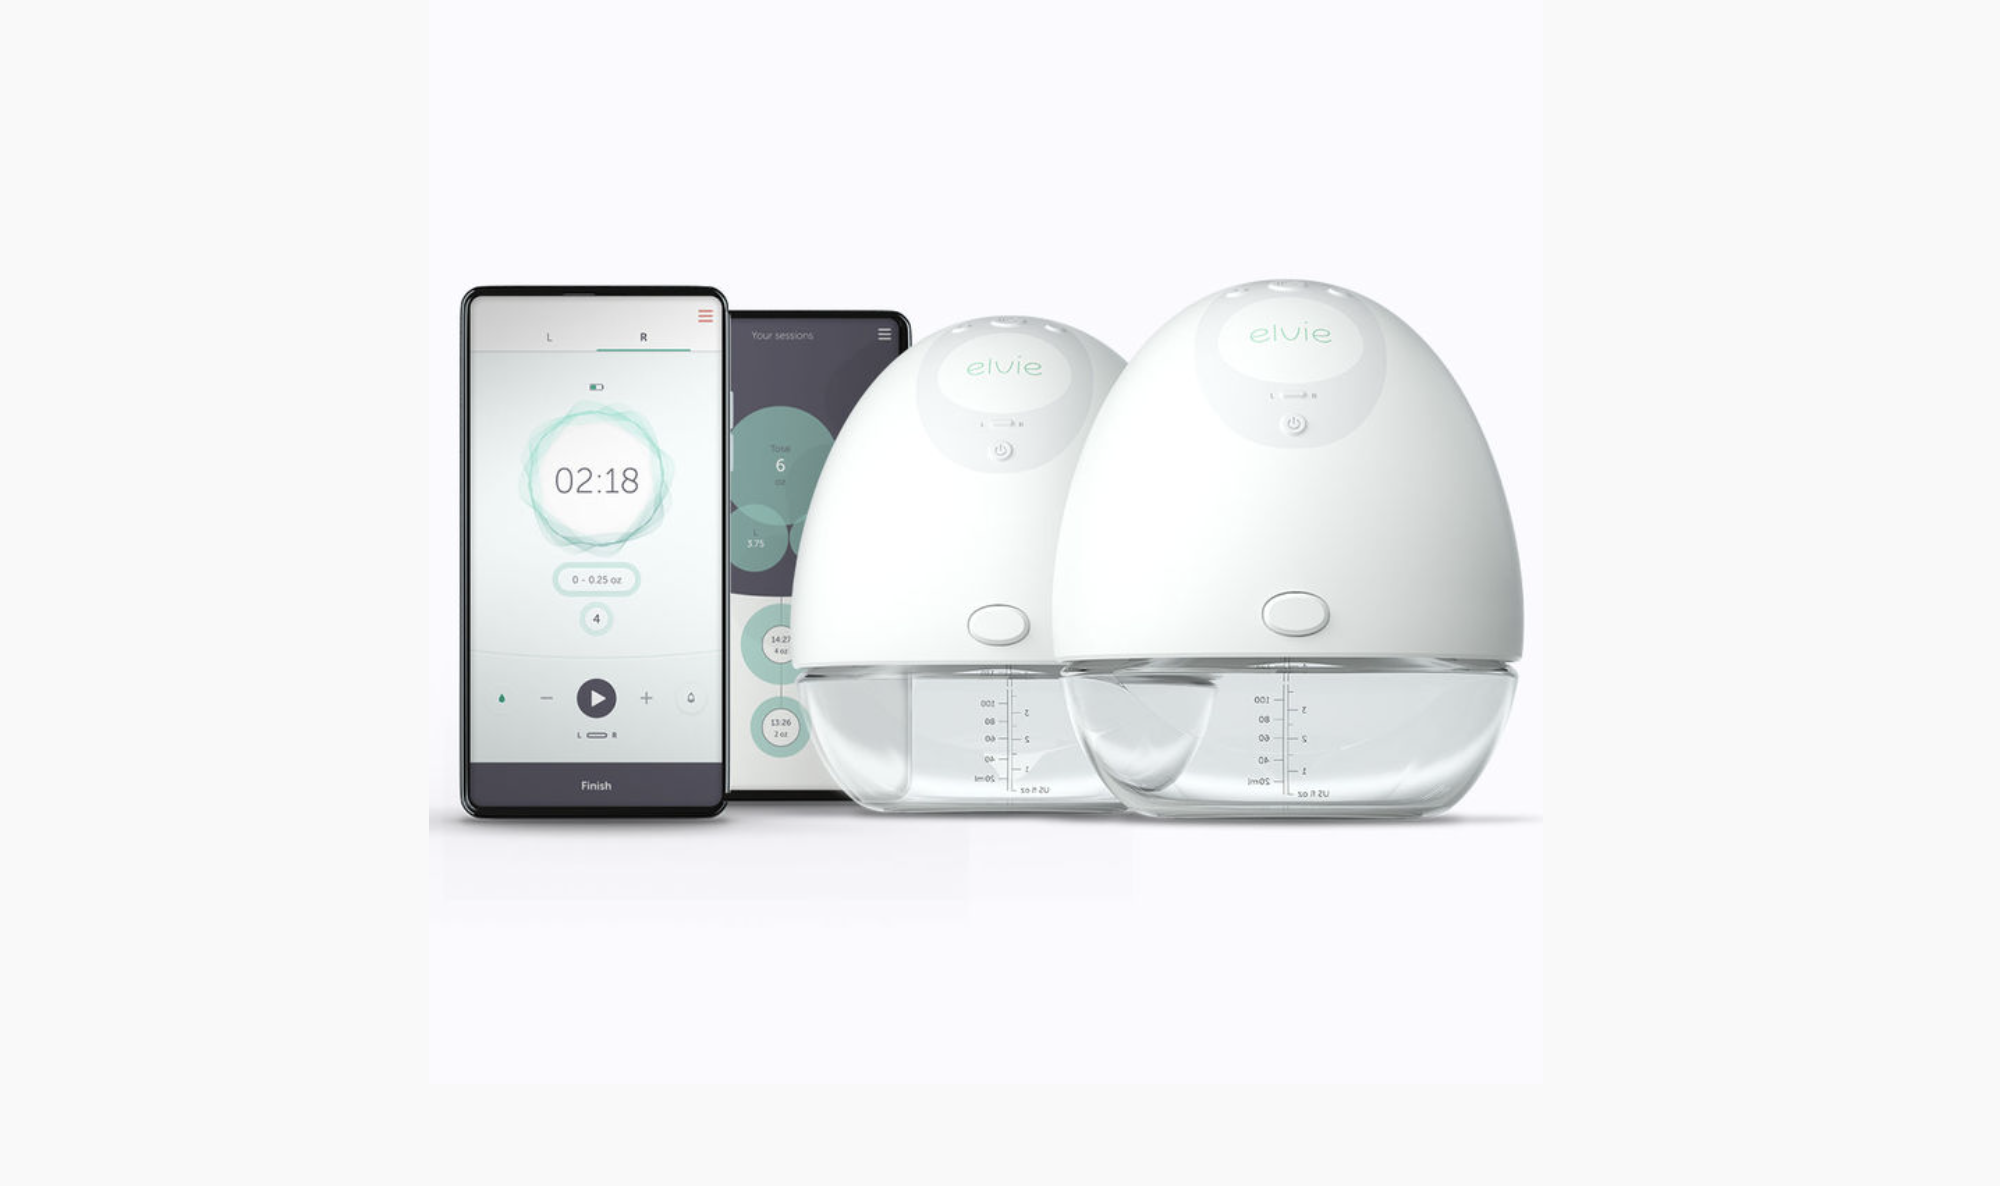 Elvie Wearable Hands-free Electric Breast Pump Kit with Elvie